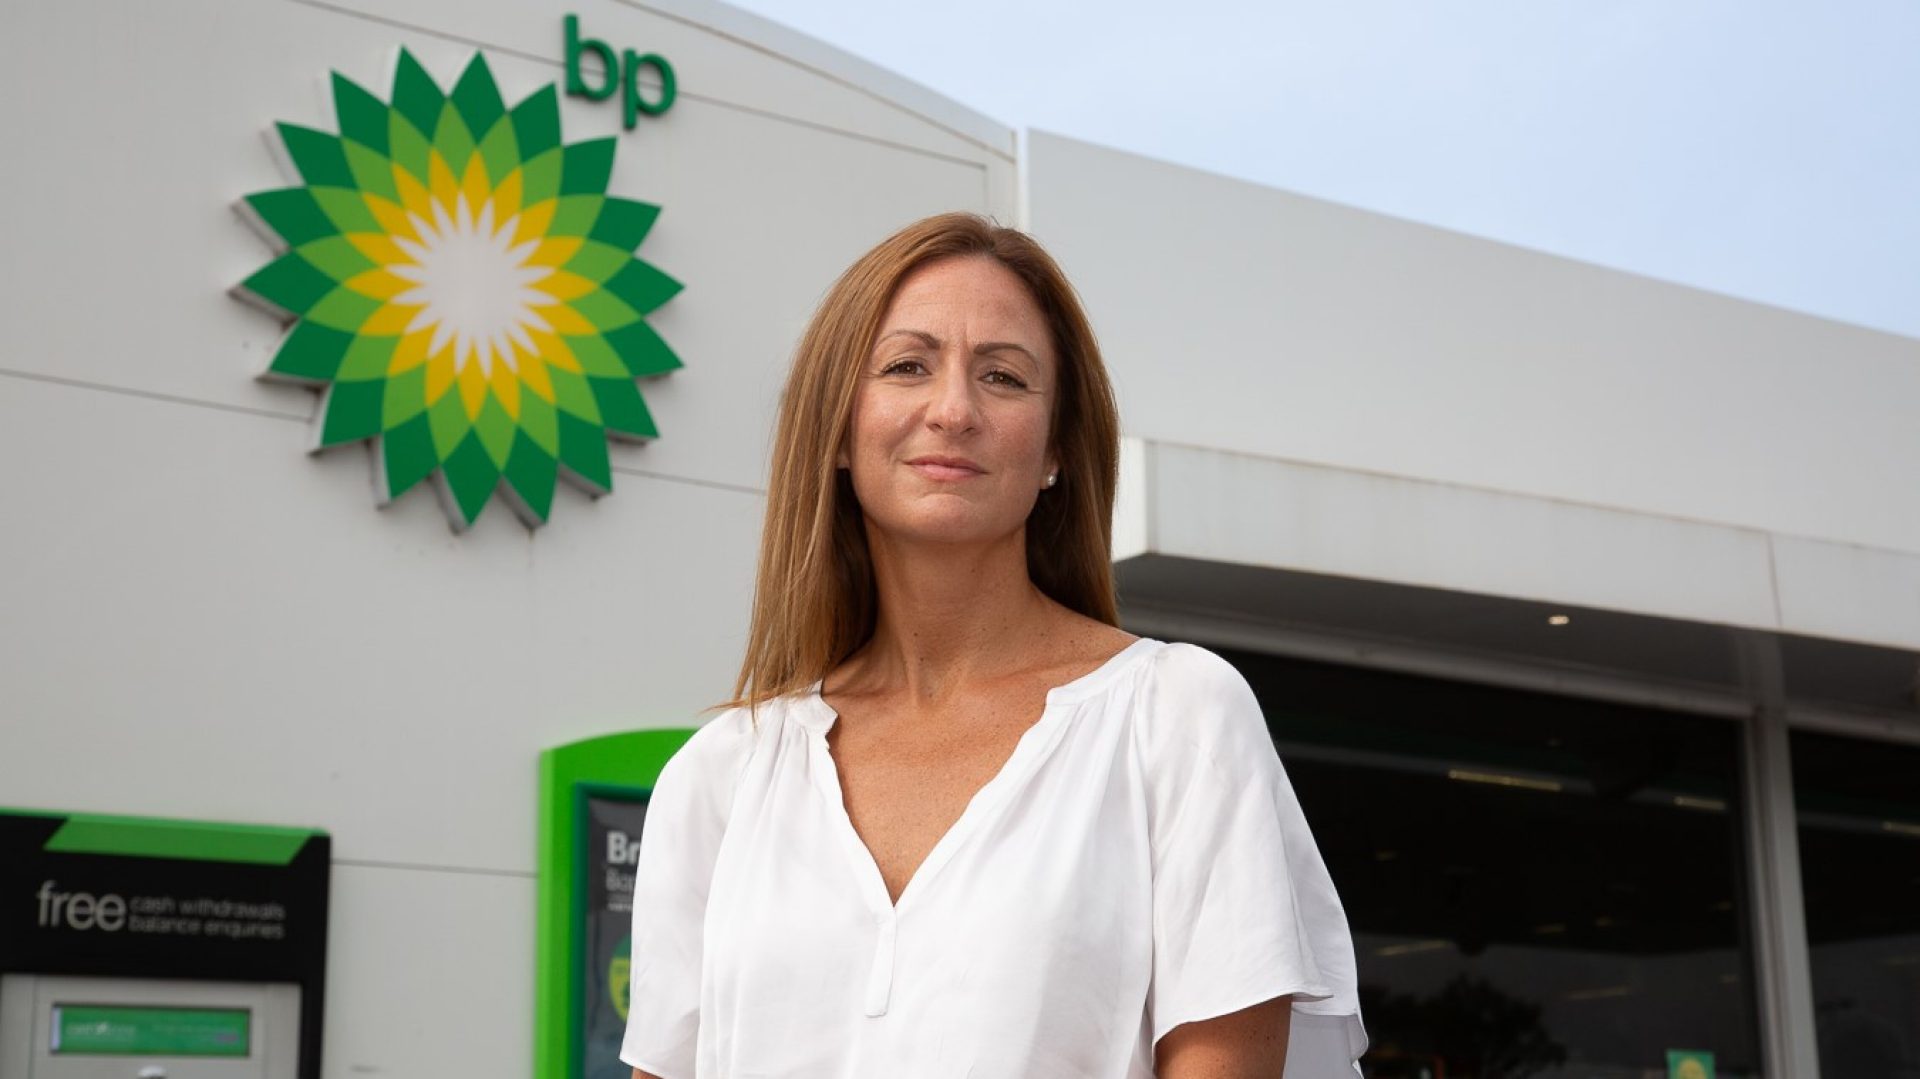 bp appoints former Sainsbury’s exec Joanne Hall as UK retail operations director